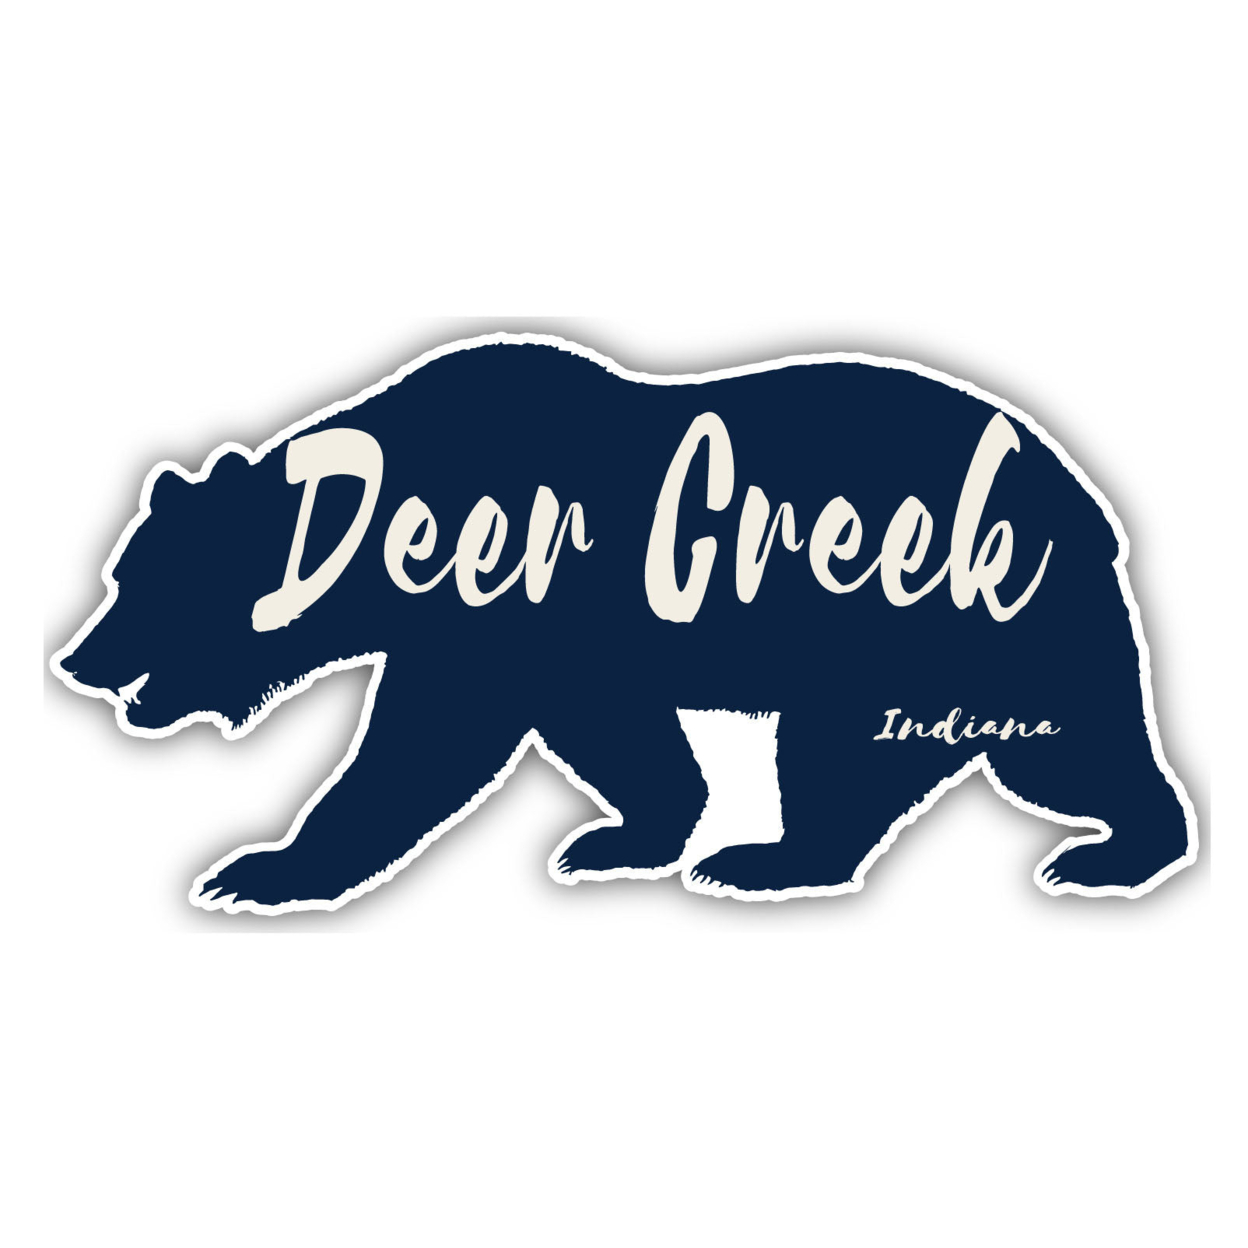 Deer Creek Indiana Souvenir Decorative Stickers (Choose Theme And Size) - 4-Pack, 4-Inch, Bear